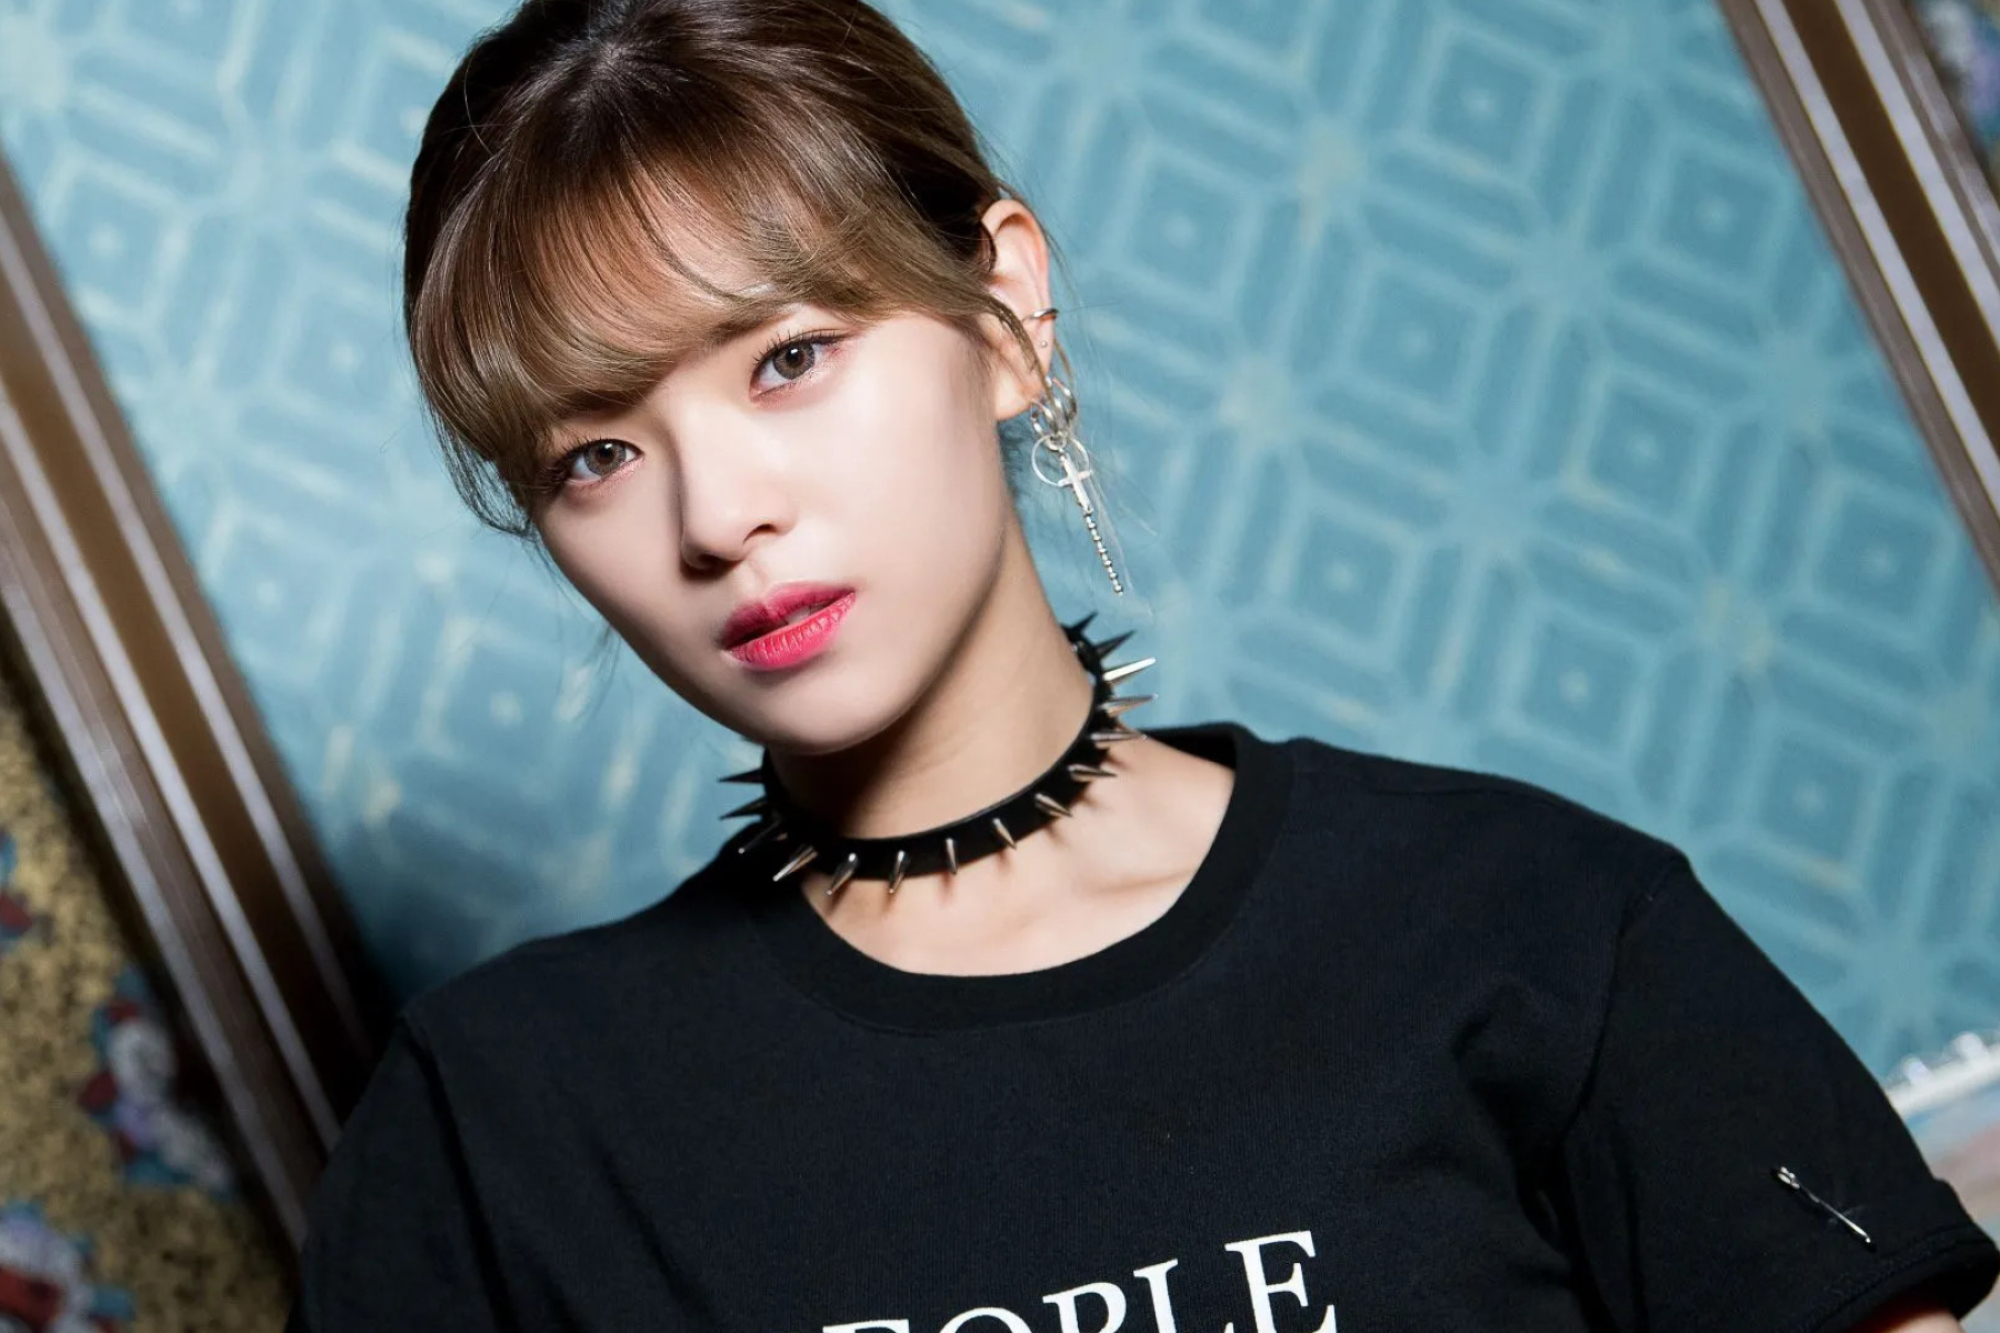 Behind-the-scenes shoot, Jeongyeon in music video, Naver x Dispatch, KPopping exclusive, 2000x1340 HD Desktop